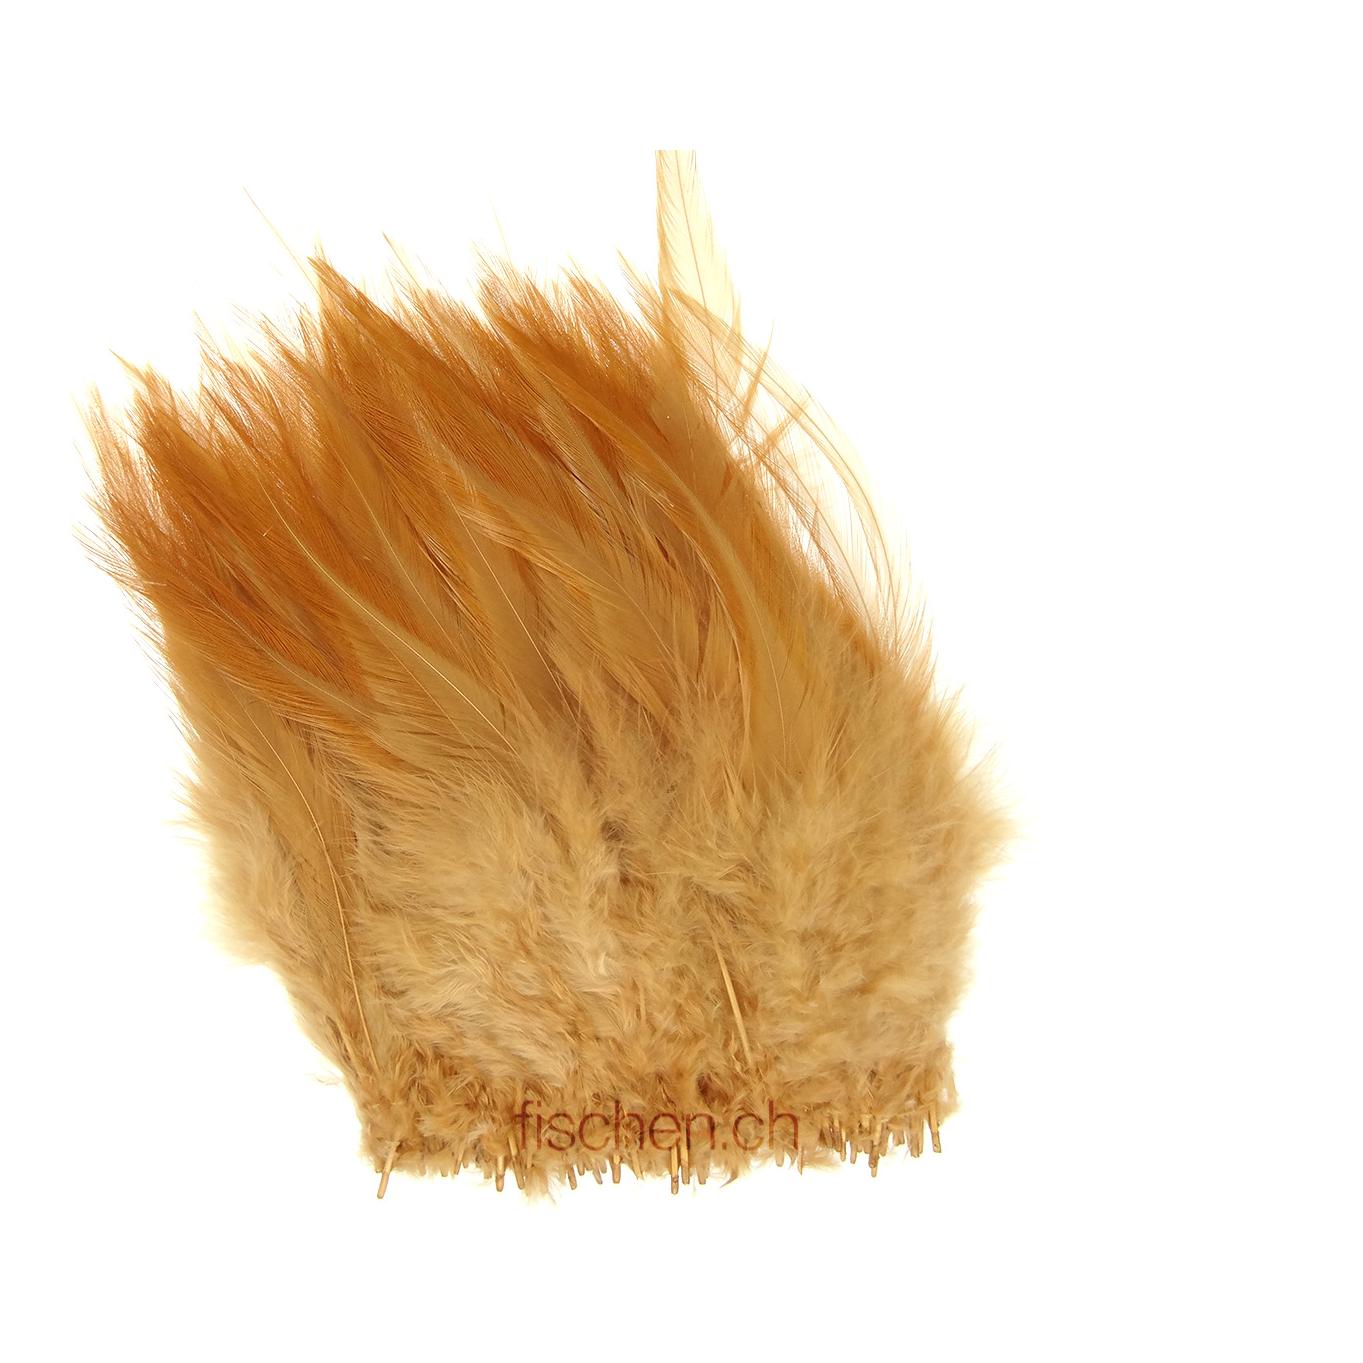 Image of Hareline Dubbin Strung Chinese Saddle Hackle - Tan bei fischen.ch